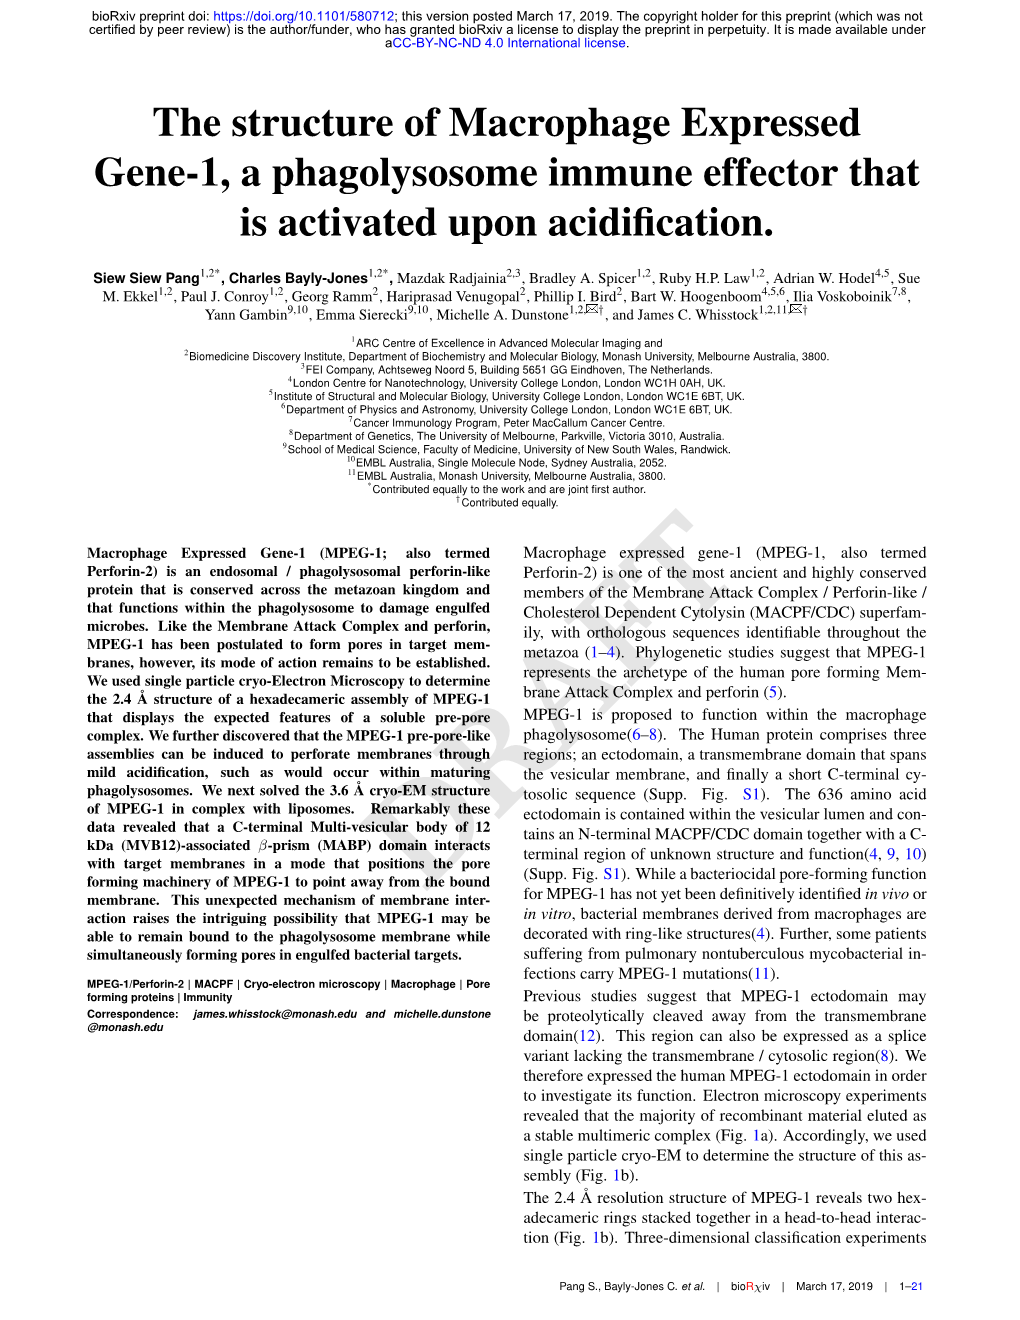 The Structure of Macrophage Expressed Gene-1, a Phagolysosome Immune Effector That Is Activated Upon Acidiﬁcation